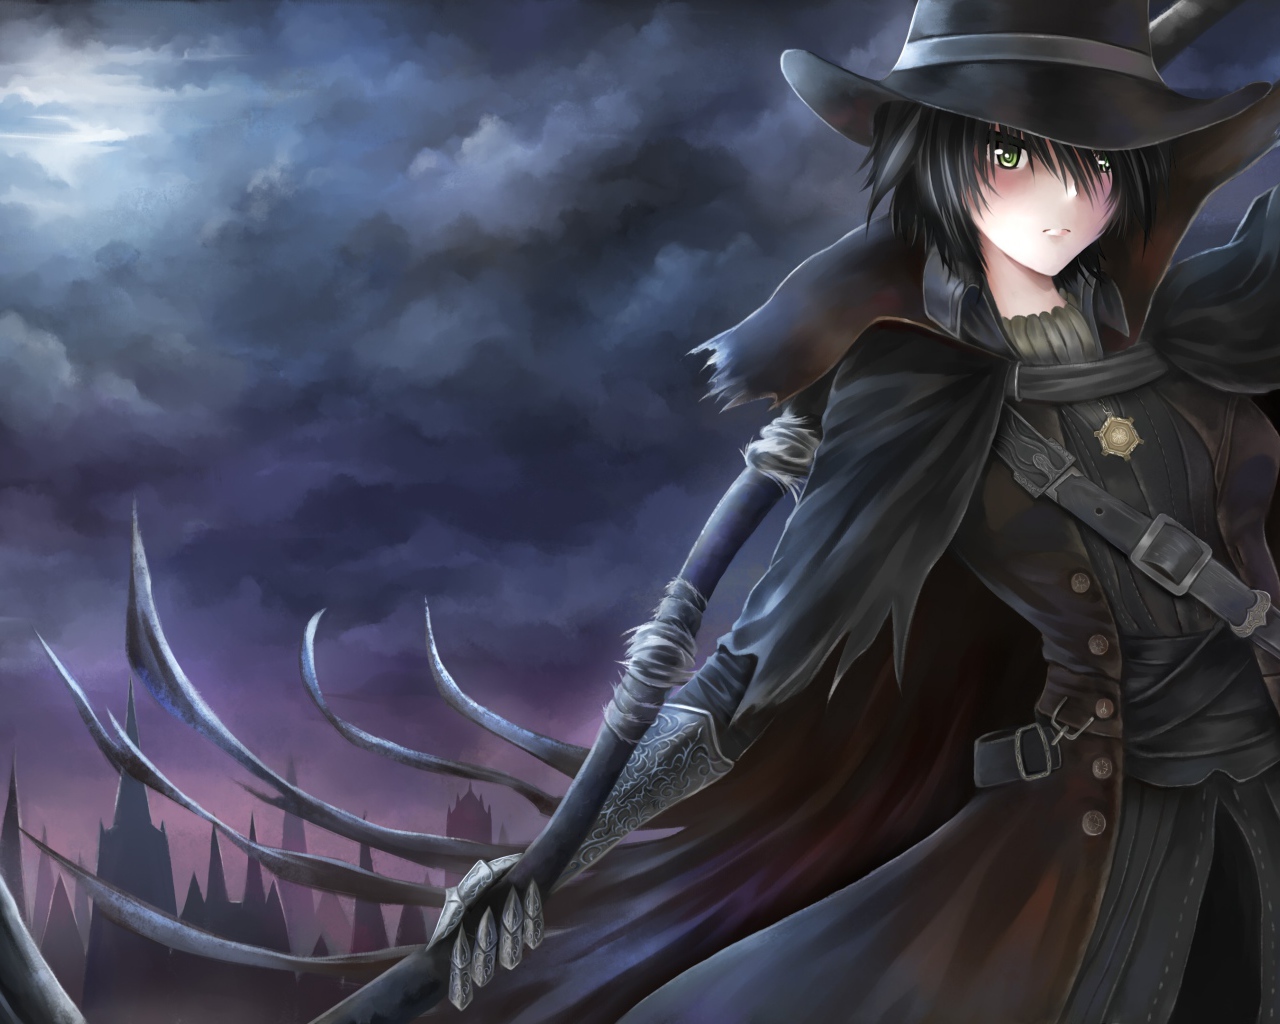 Man in black anime character Bloodborne 